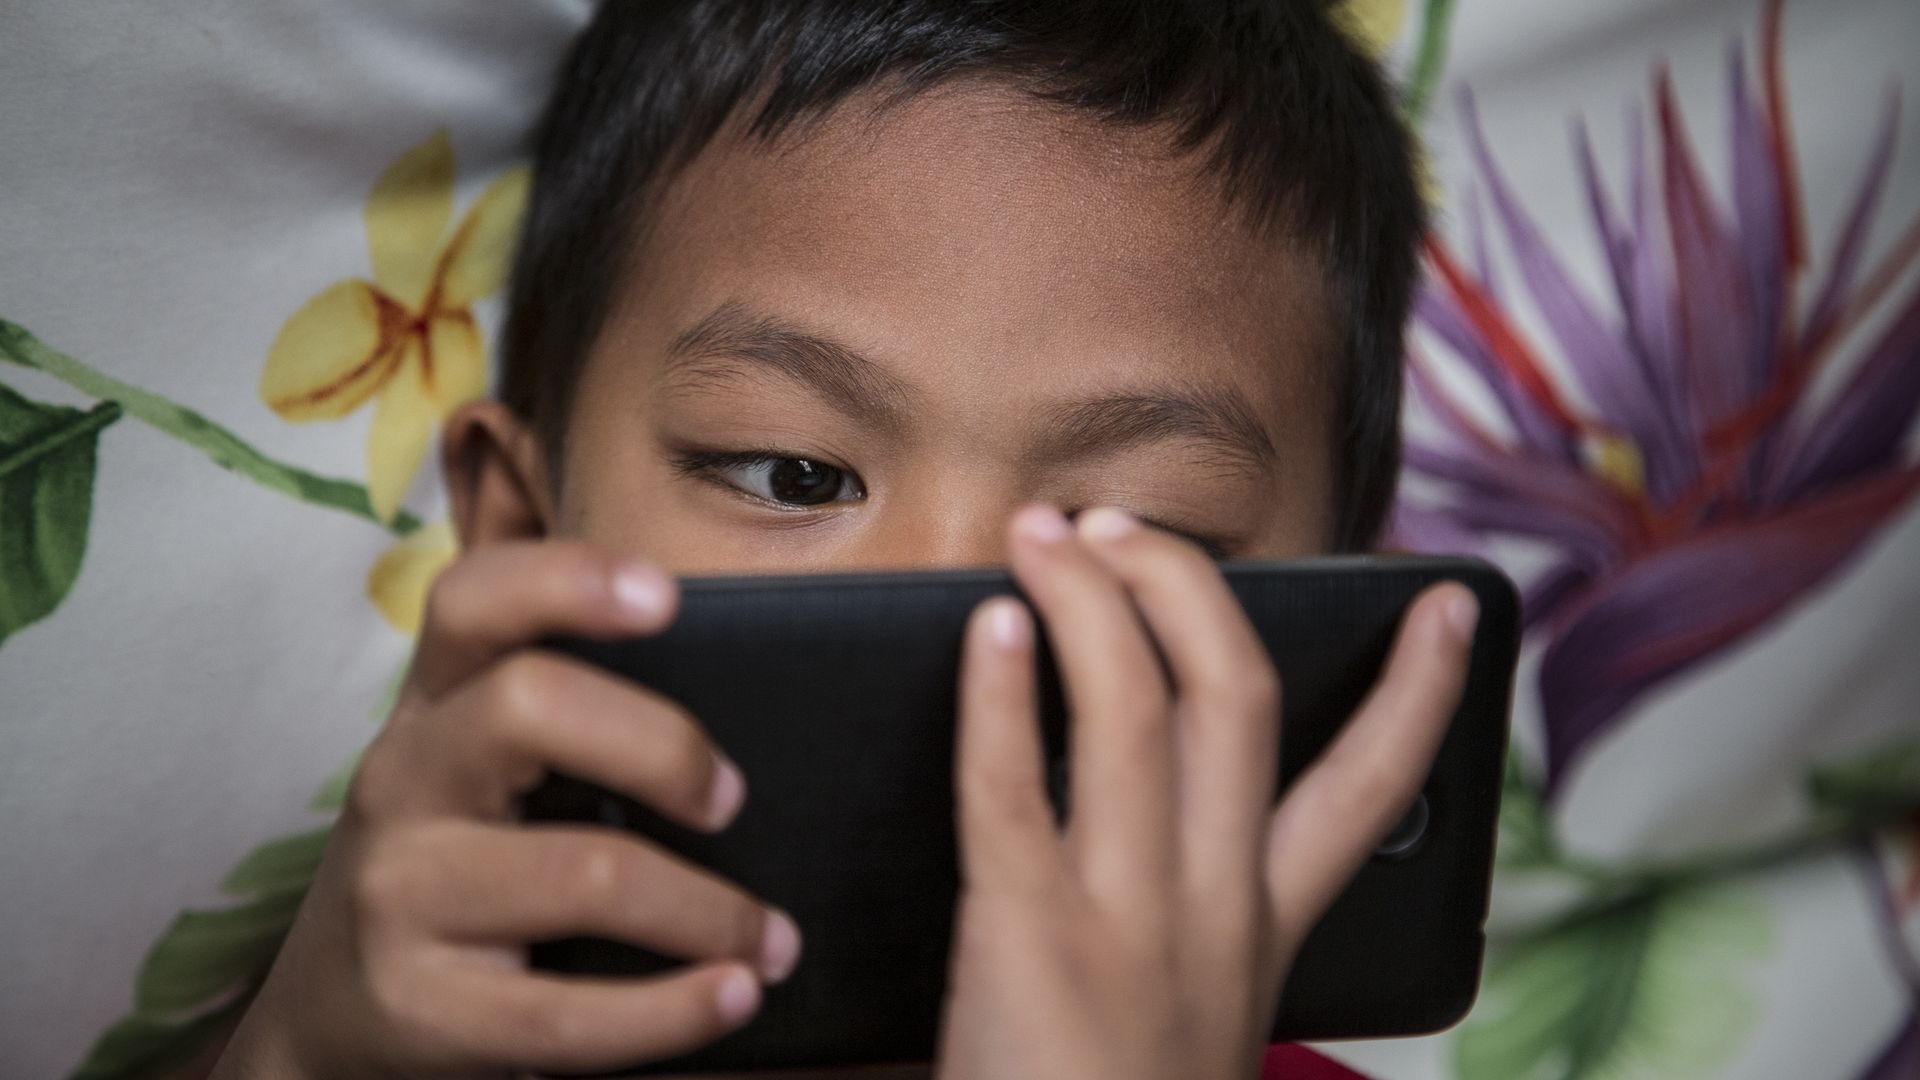 A child looks at a mobile phone.